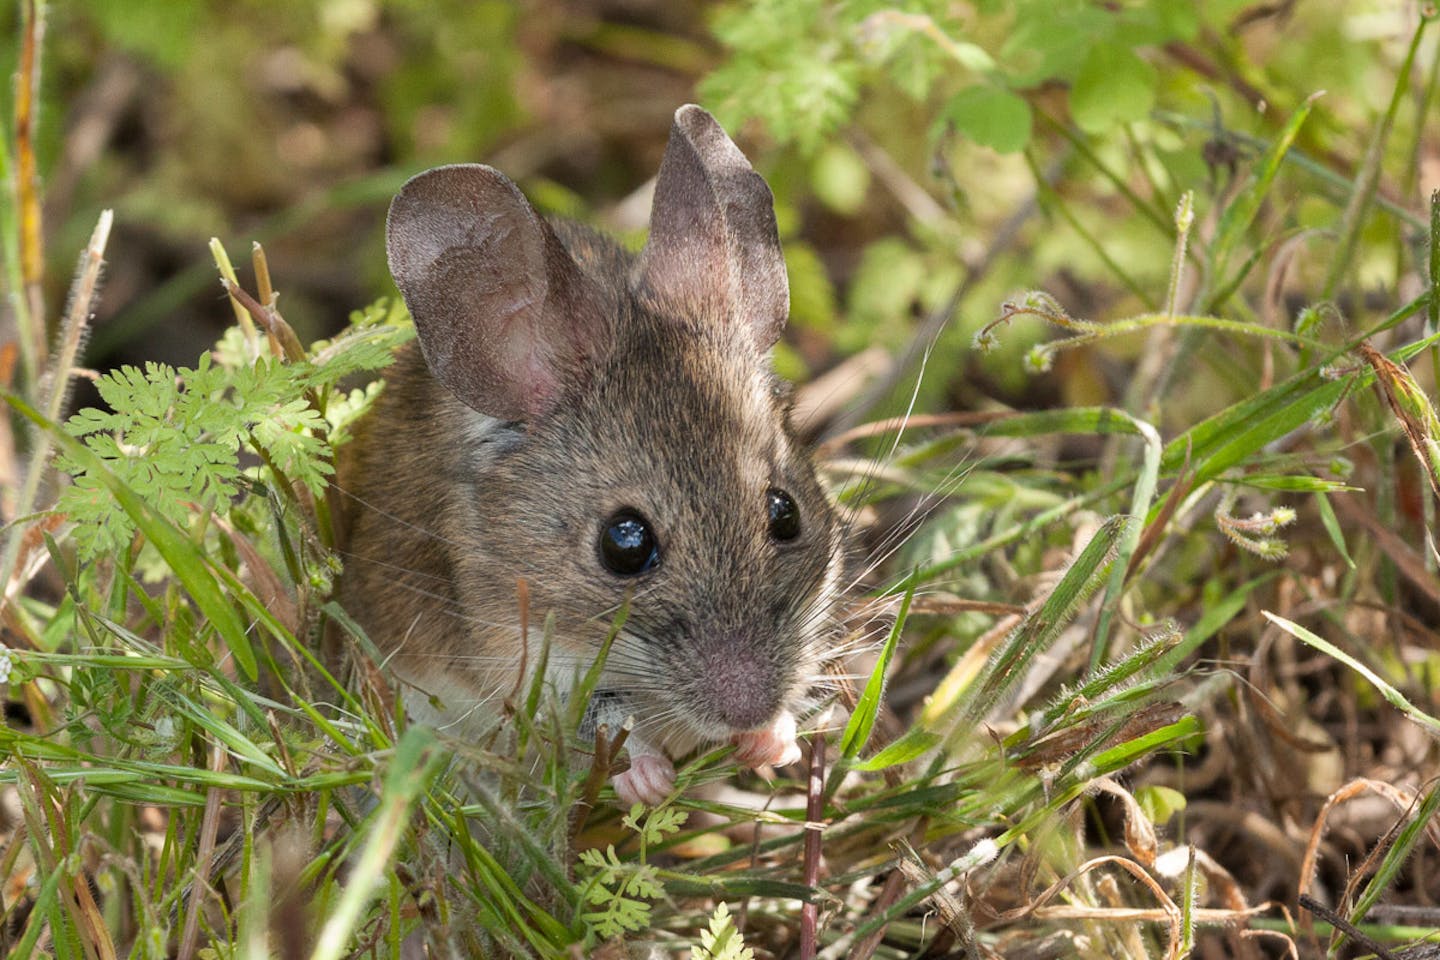 Darwin’s leaf-eared mouse: helping plants grow in the desert